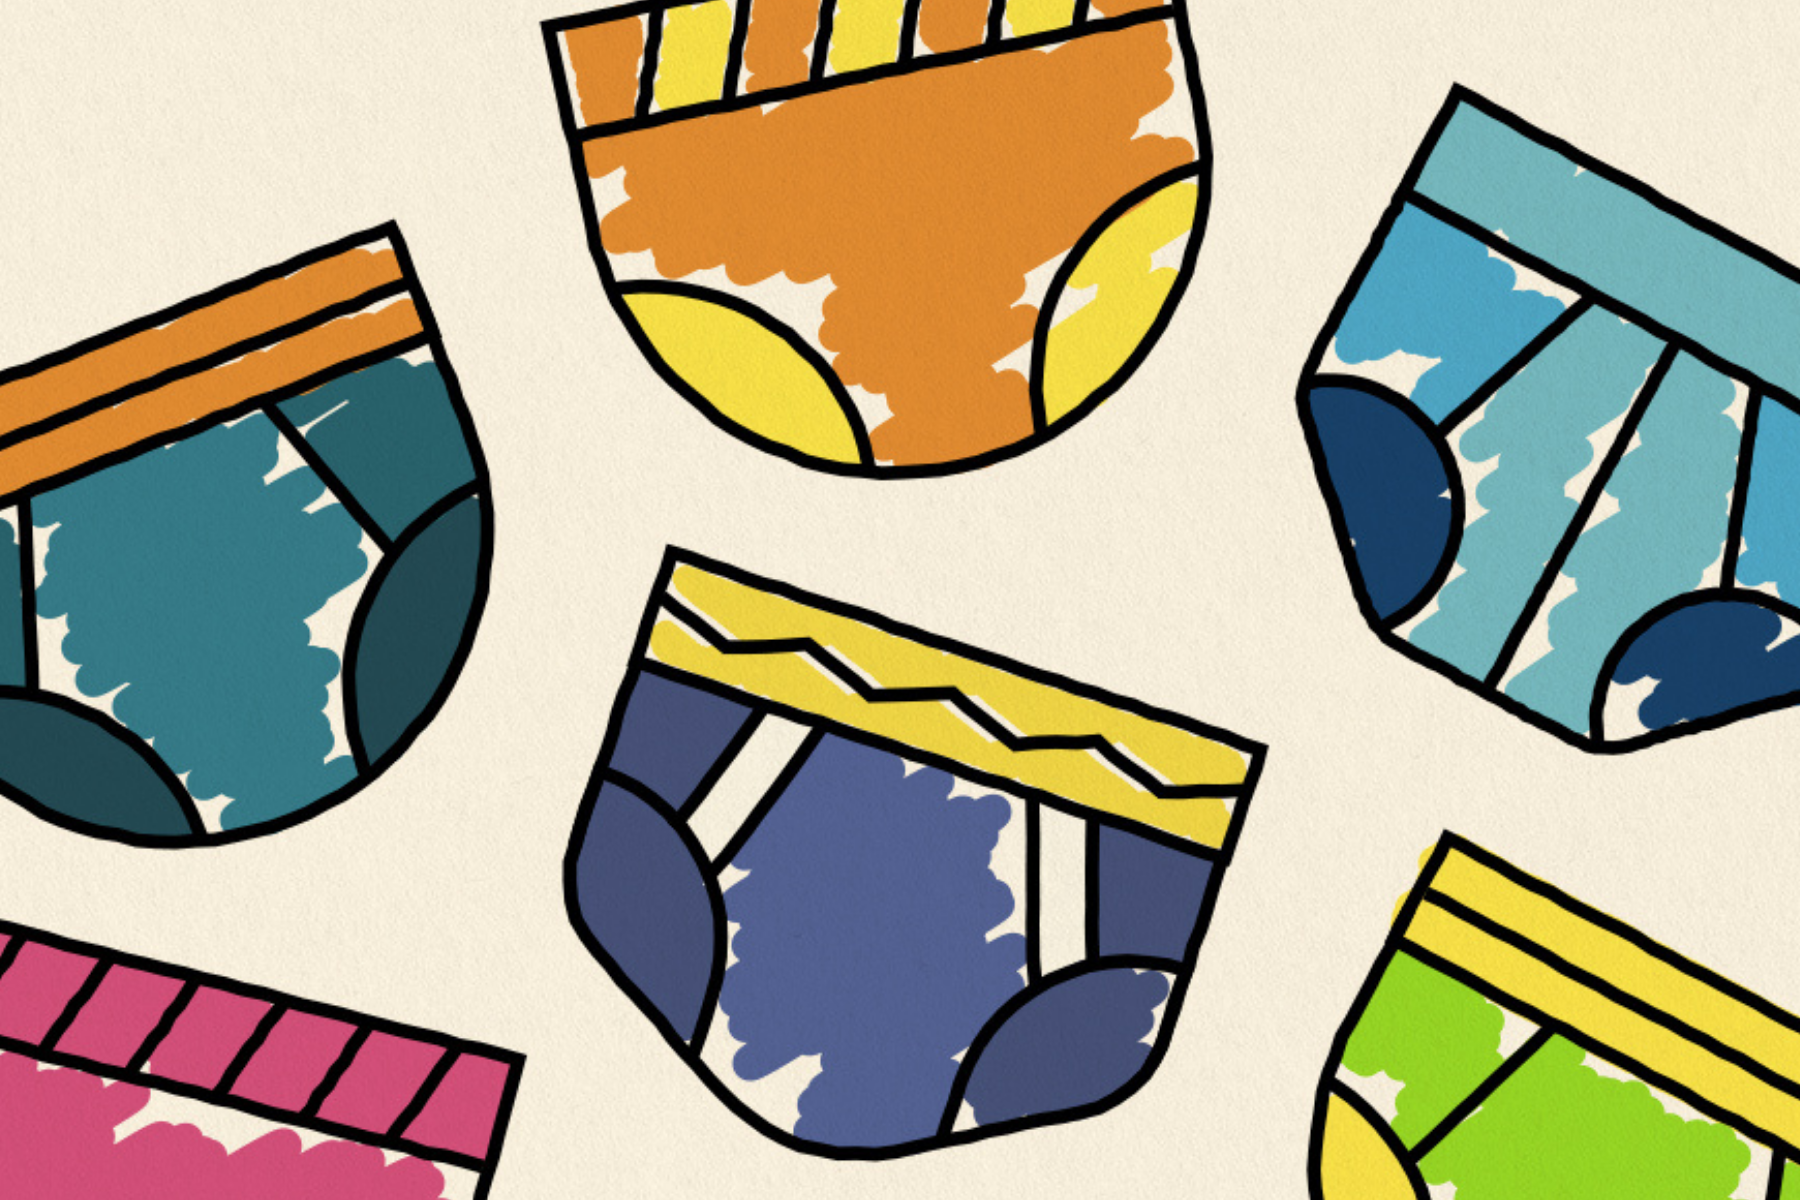 An image showing illustrations of underwear that have been coloured in